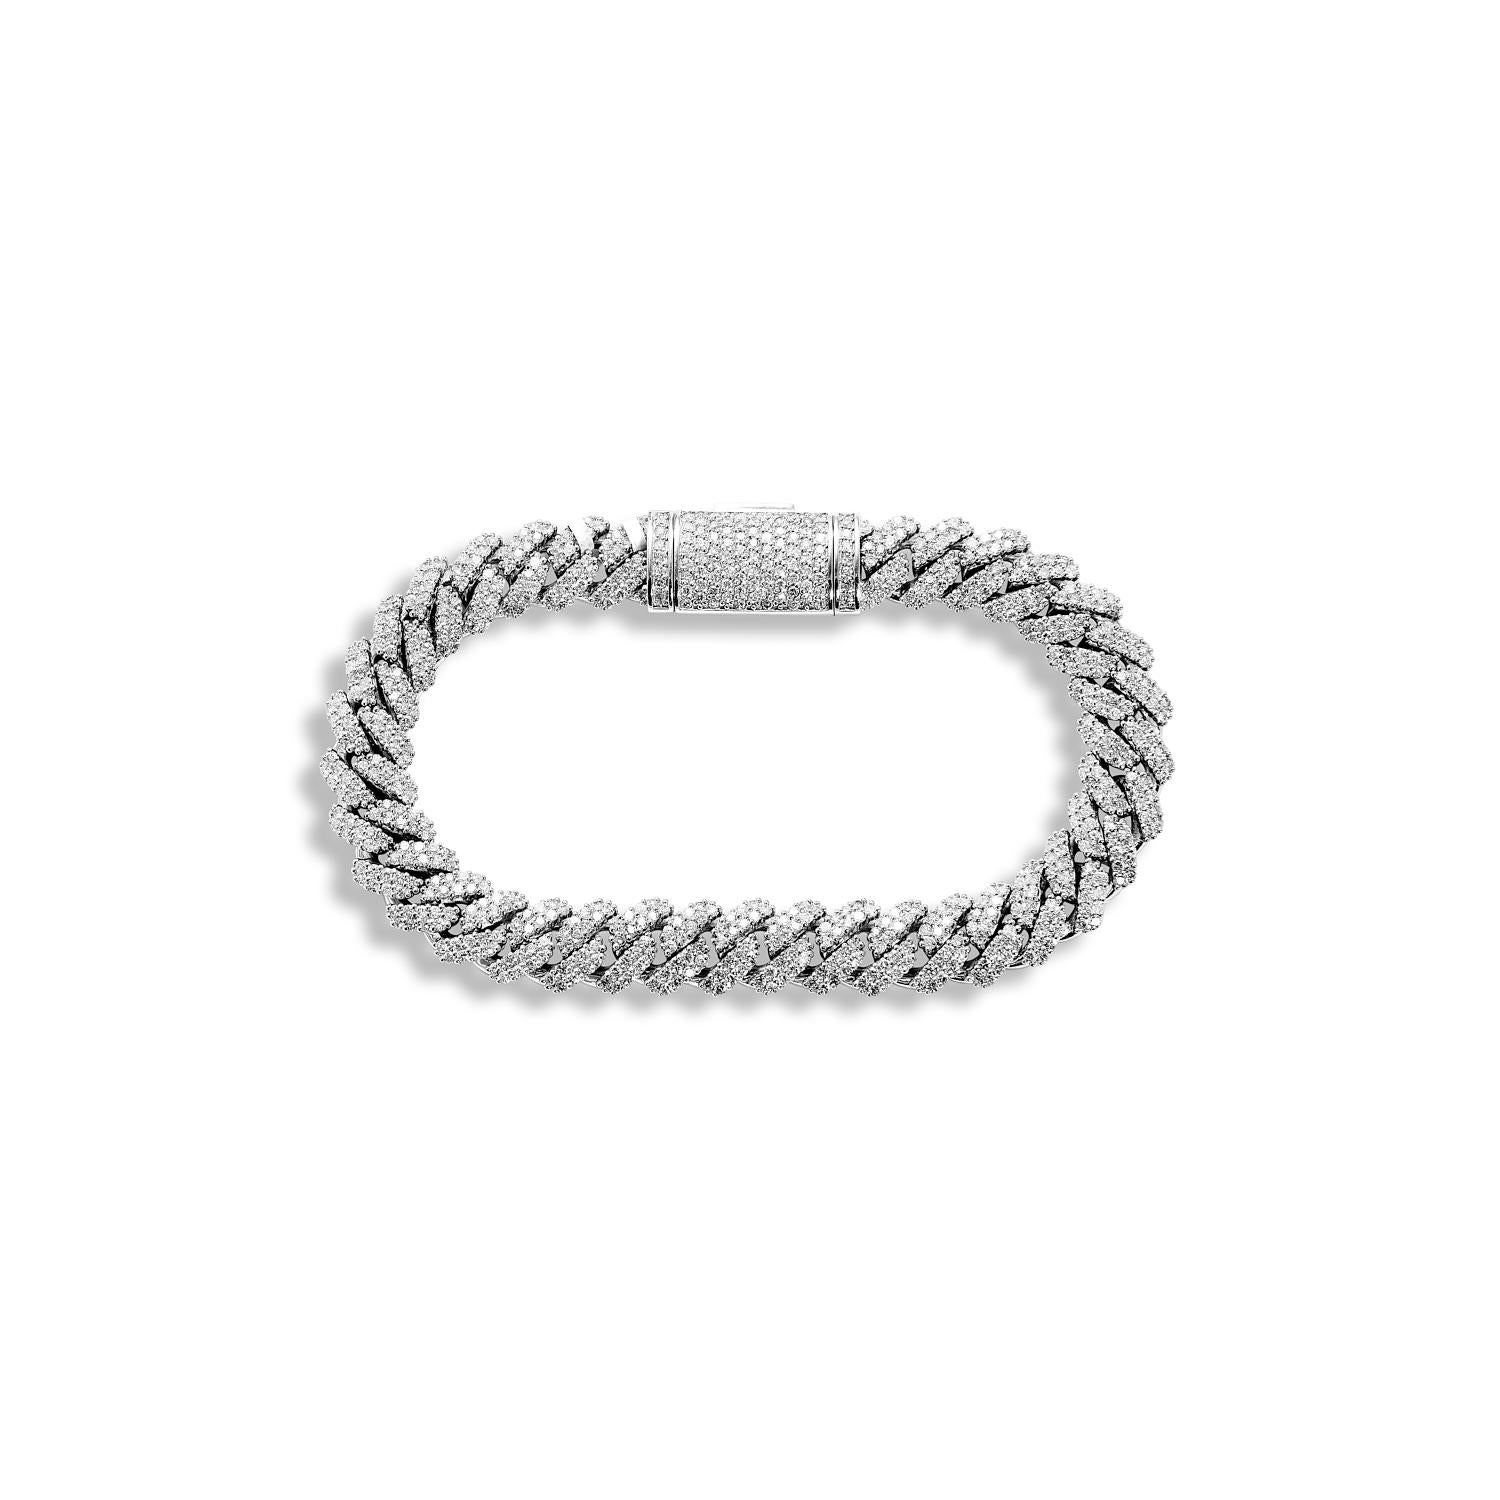 The COPA Men’s 7 Carat Diamond Cuban Link Chain Bracelet features round brilliants weighing a total of approximately 7 carats, set in 14K White Gold.

Meticulously handcrafted to perfection in our own factory in the New York City Diamond District,